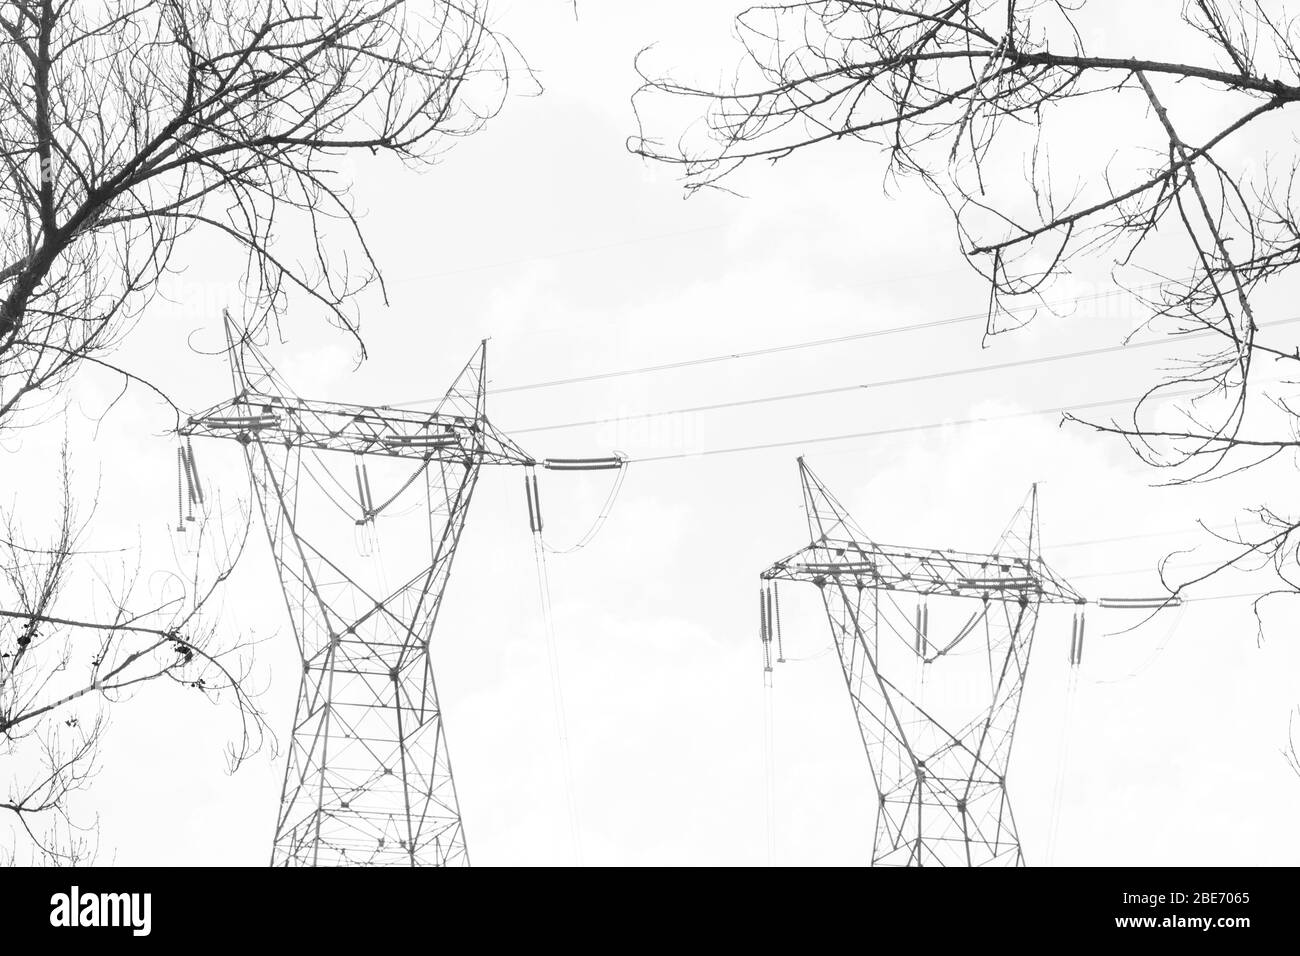 Black and white silhouette of two electrical towers framed by tree branches. Stock Photo